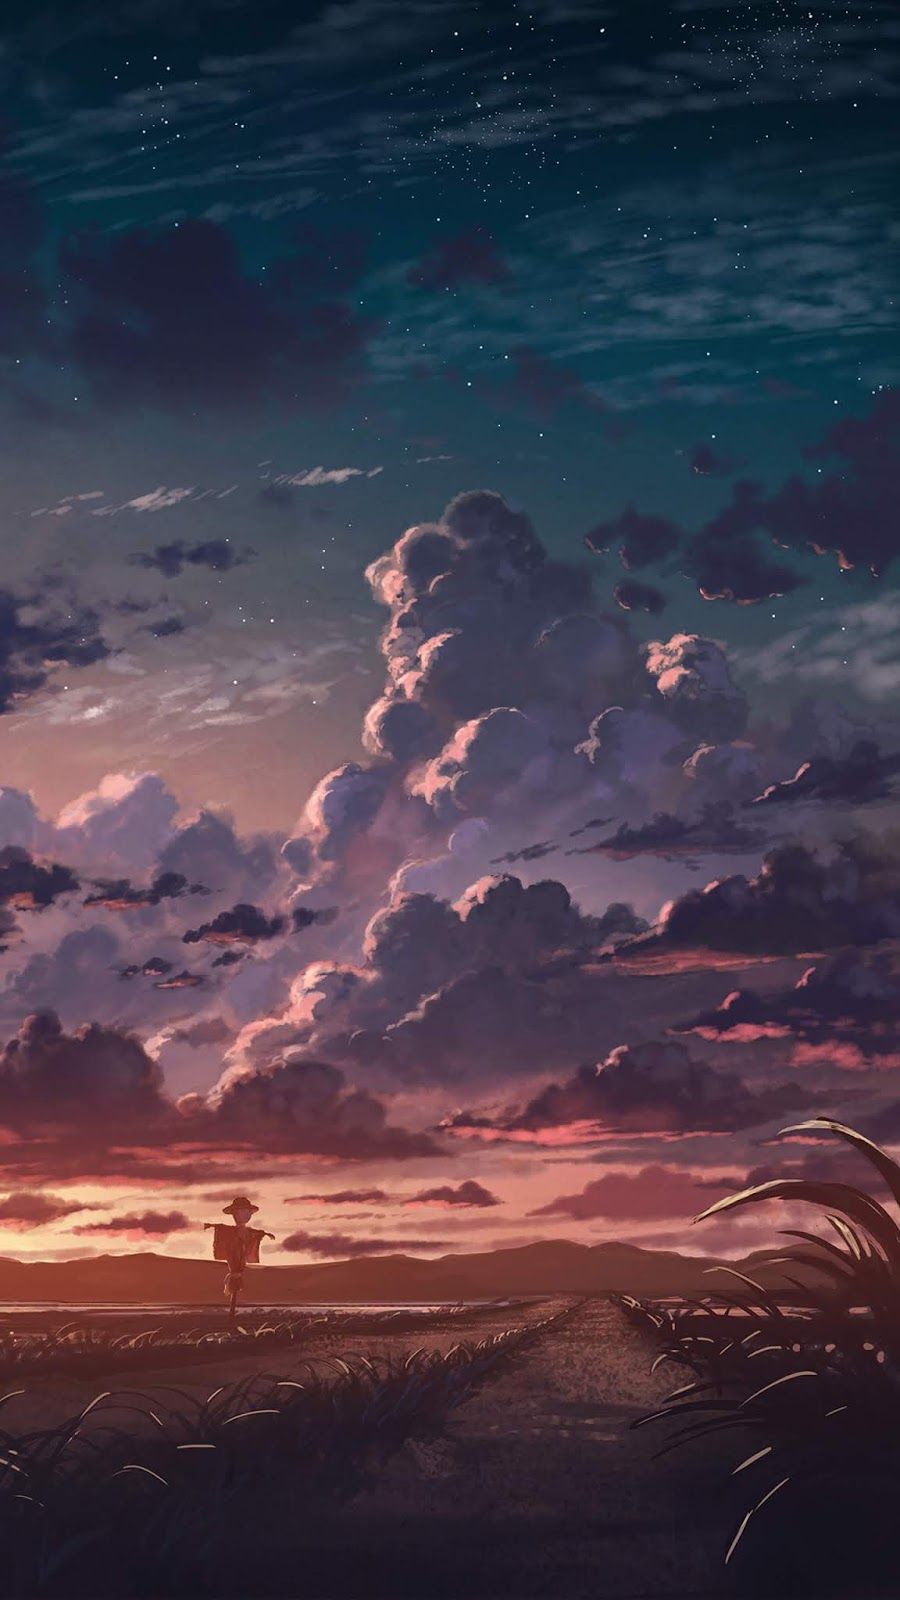 Cloudy sunset. Scenery wallpaper, Digital painting